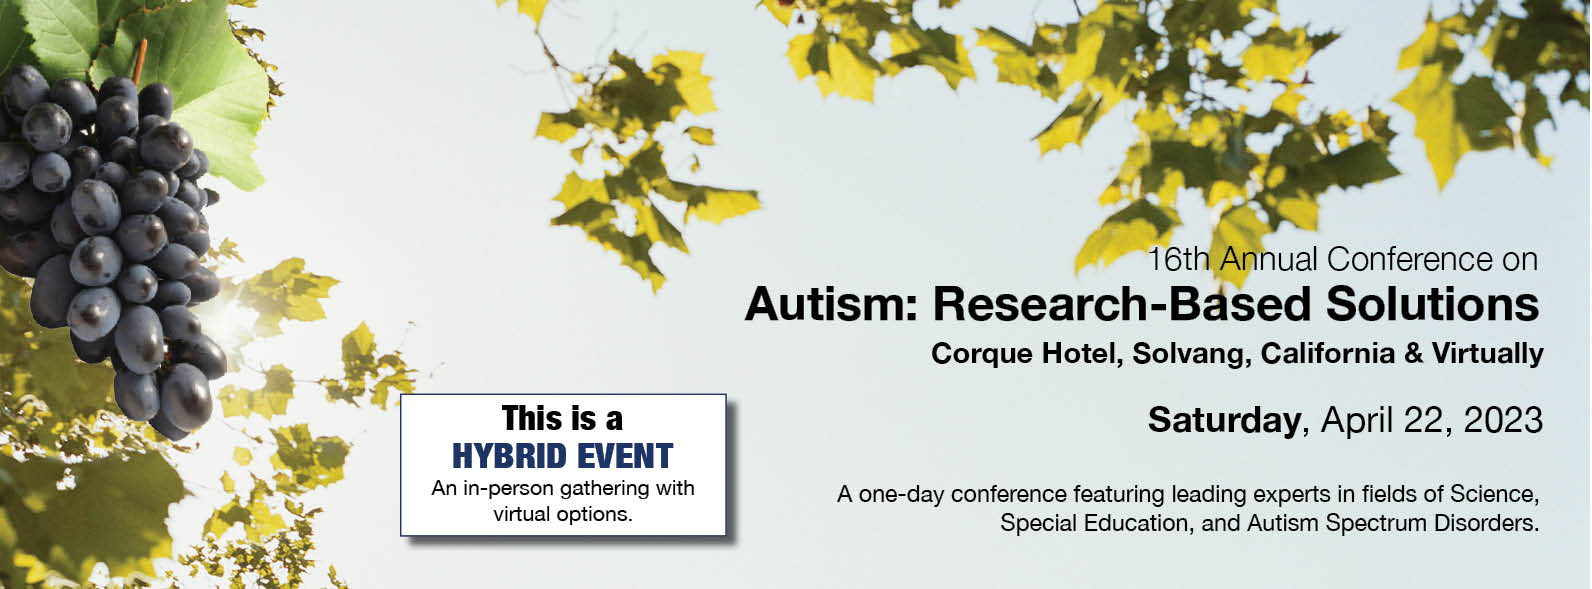 16th Annual Conference on Autism: Research-Based Solutions